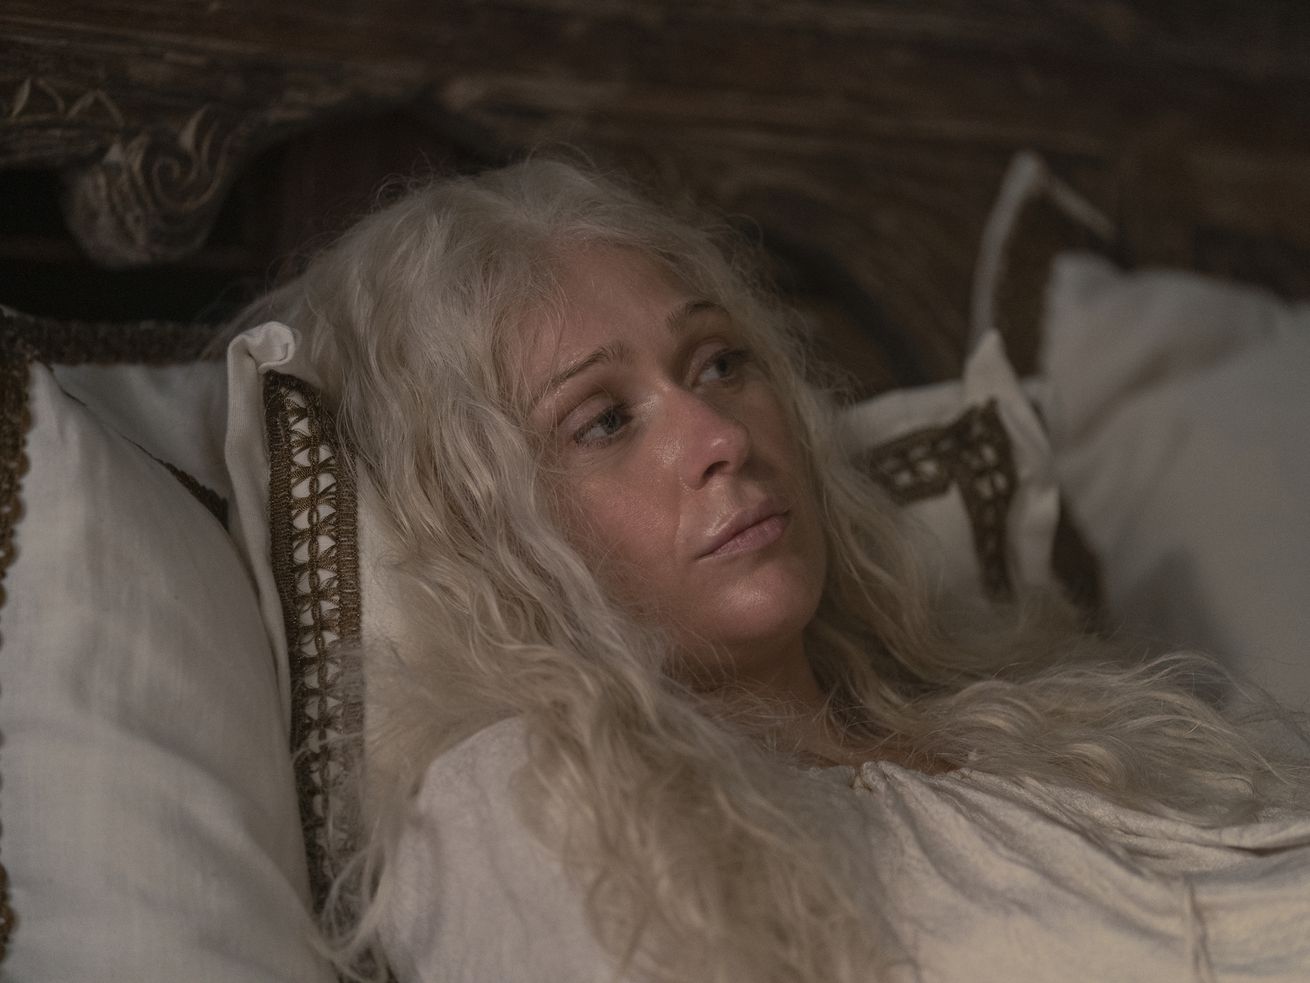 Let’s talk about House of the Dragon’s brutal childbirth scene